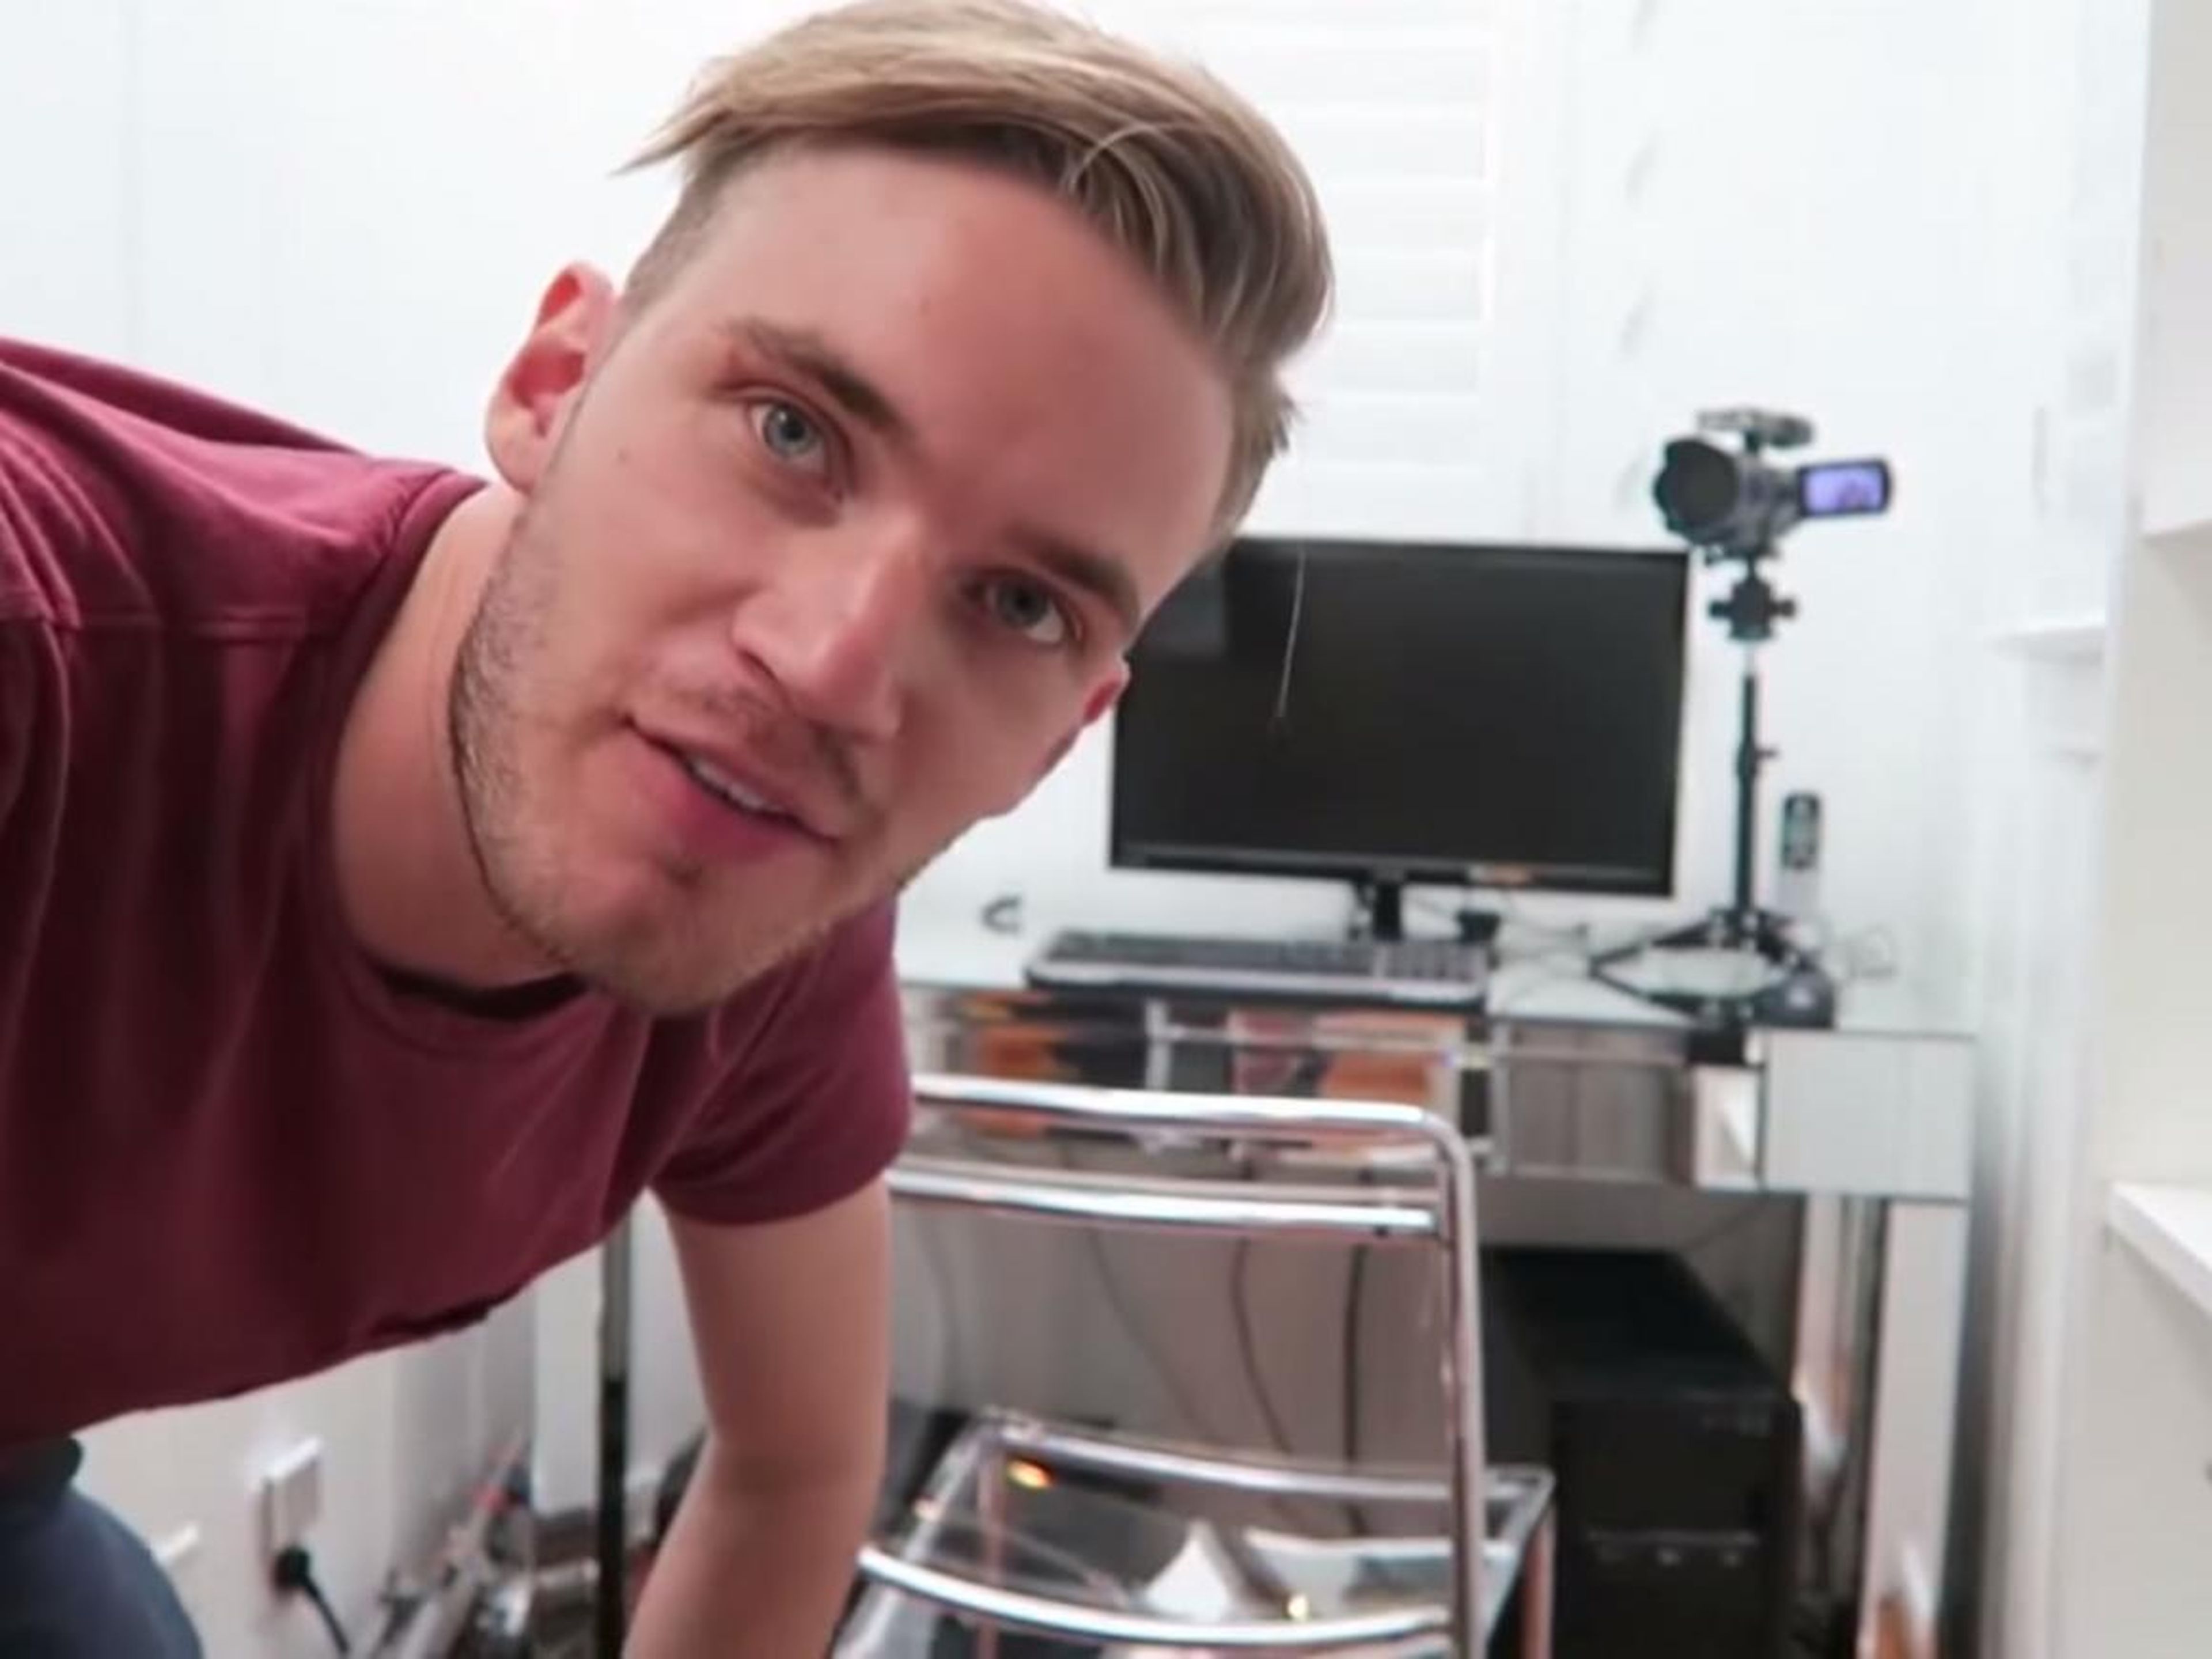 PewDiePie hit the 100-million subscriber mark in late August, becoming the first individual YouTuber to hit the milestone. Following the achievement, Kjellberg announced he would donate $50,000 to the Anti-Defamation League, a